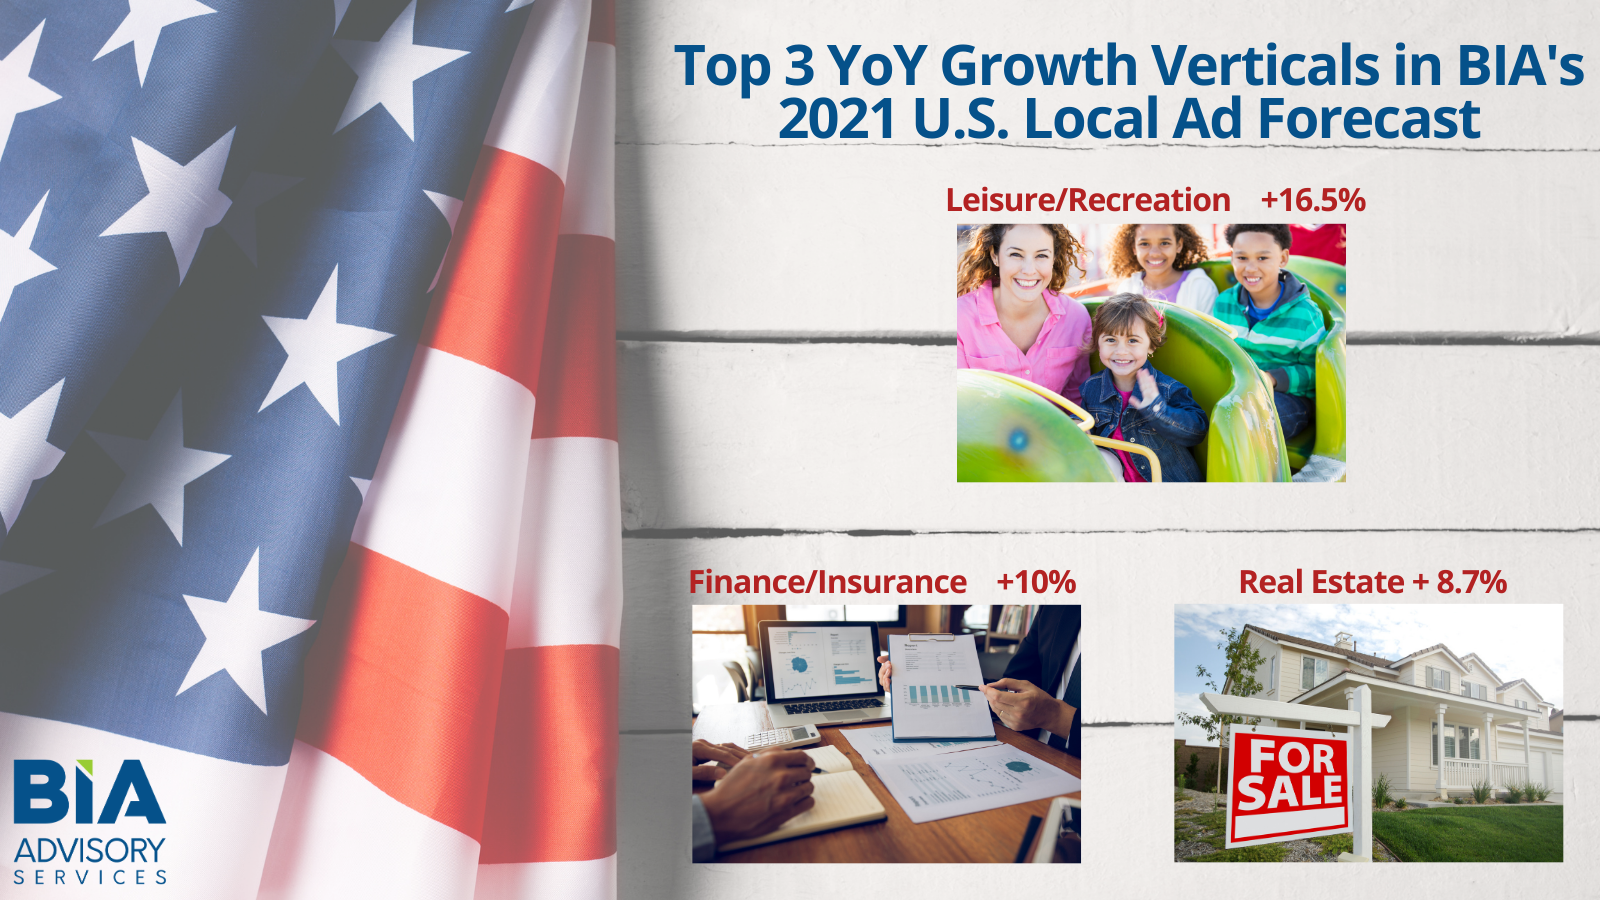 Top 3 Verticals For Local Ad Spend Growth In 2021